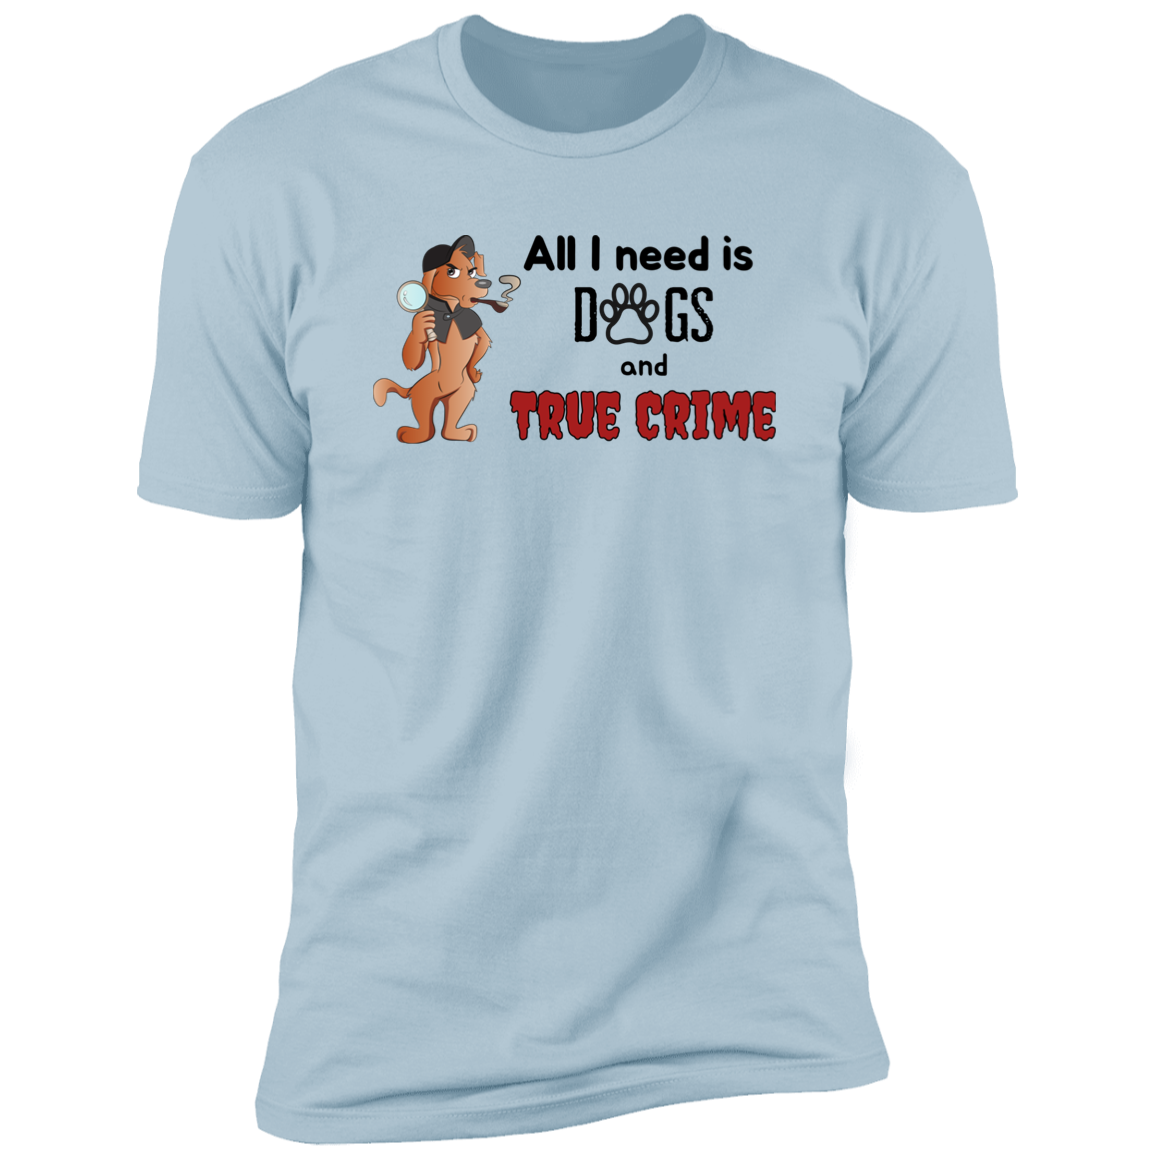 All I Need is Dogs and True Crime, Dog shirt for humas, in light blue